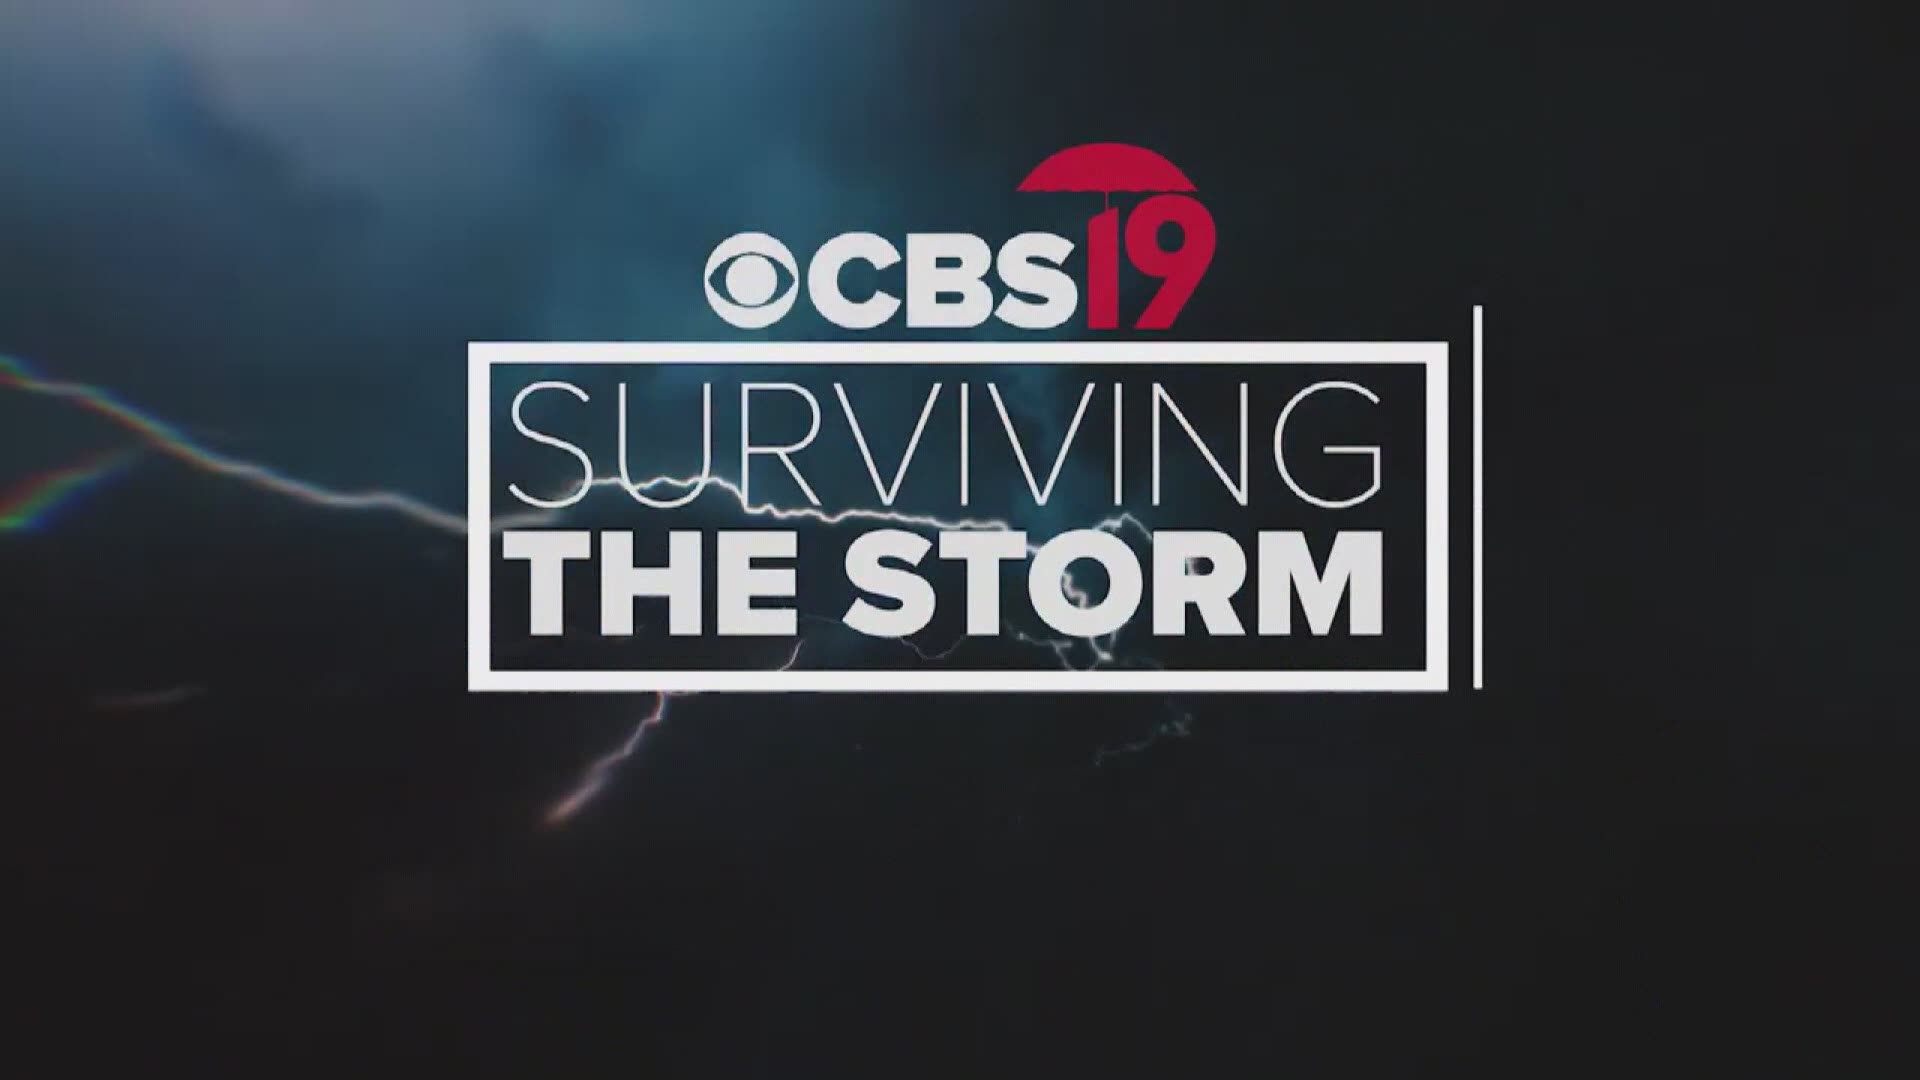 CBS19 presents Surviving the Storm to make sure you're prepared for severe weather season.